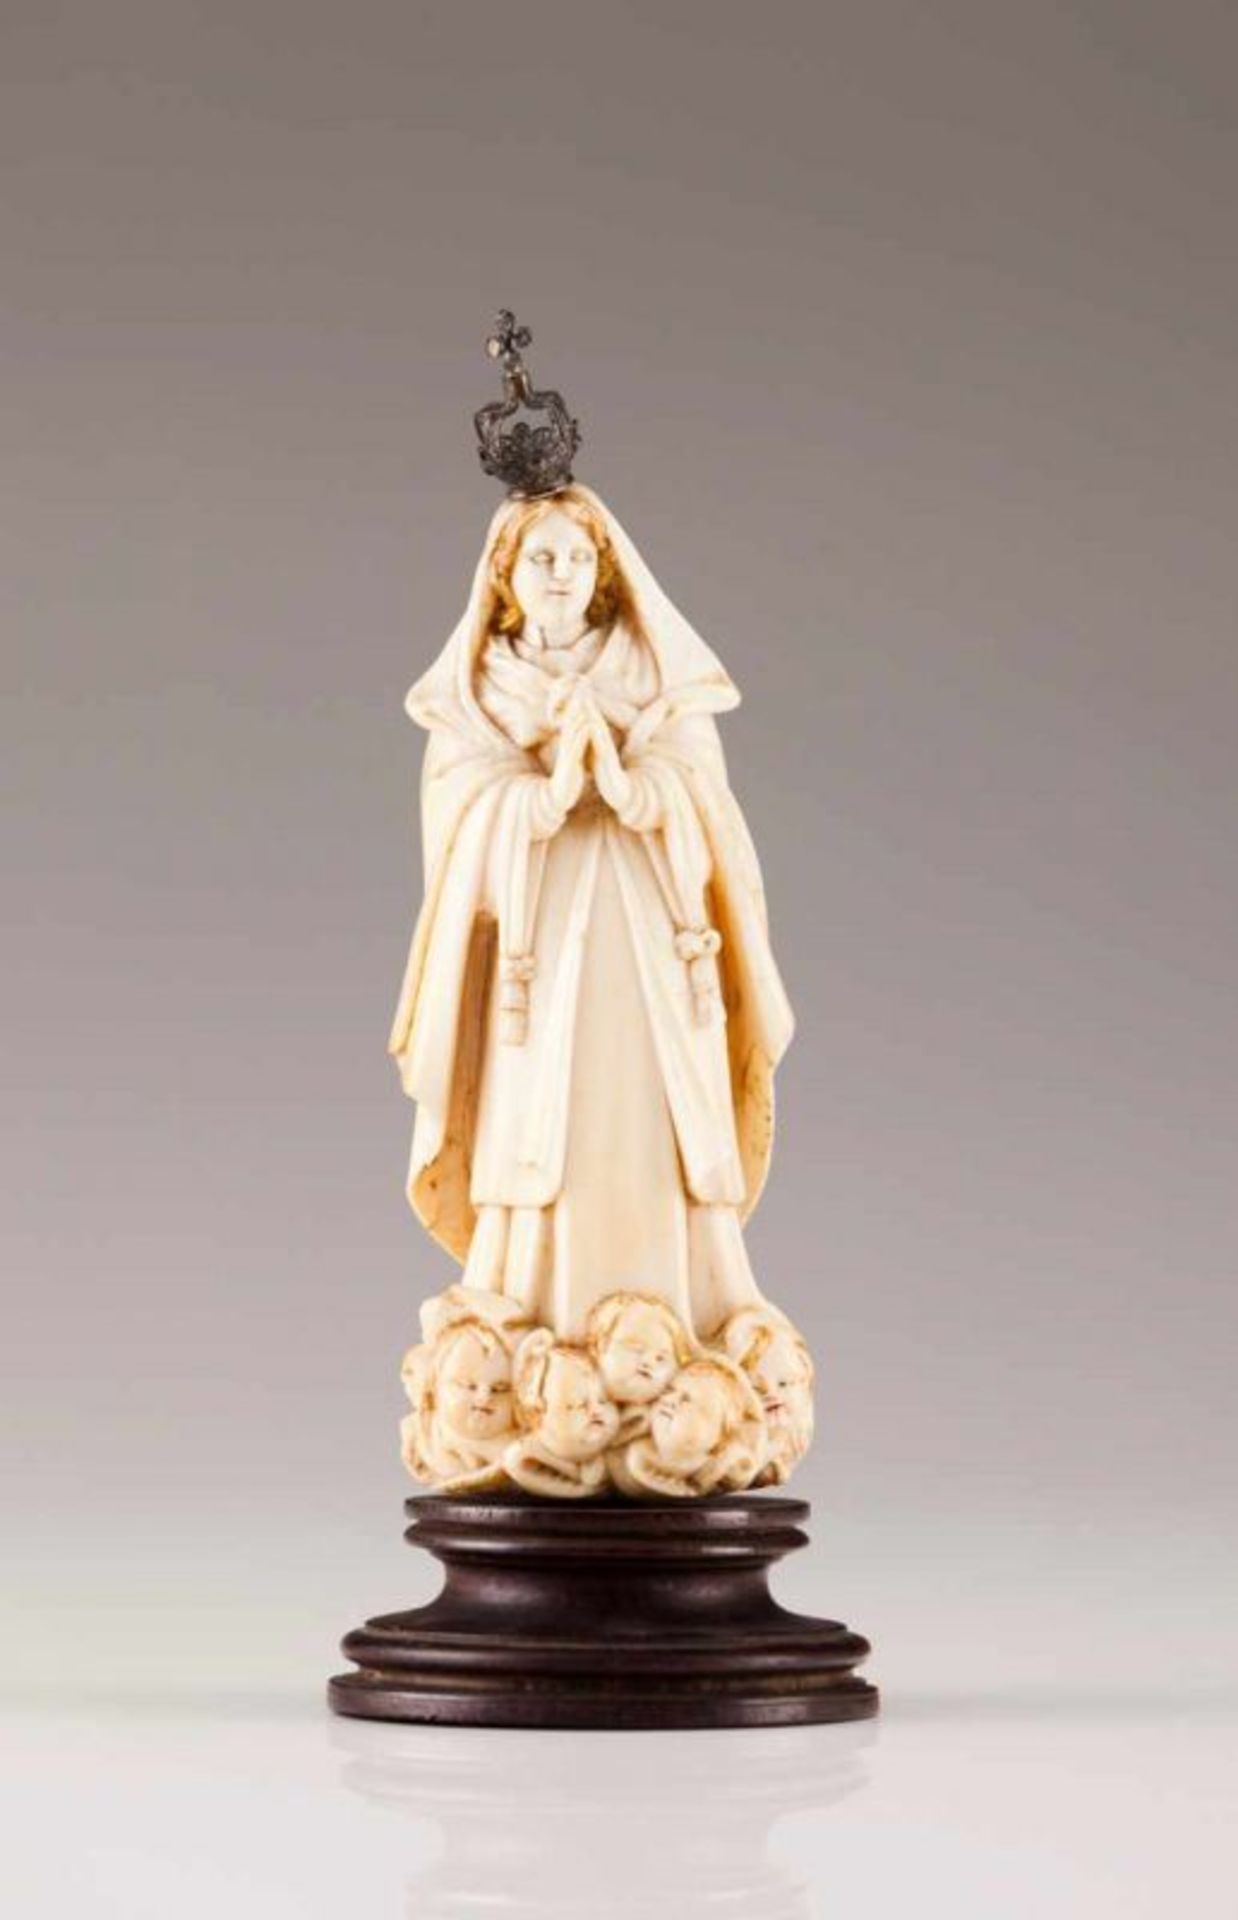 Our Lady of the Assumption Ivory Indo-Portuguese sculpture Late 17th, early 18th century Height: 13